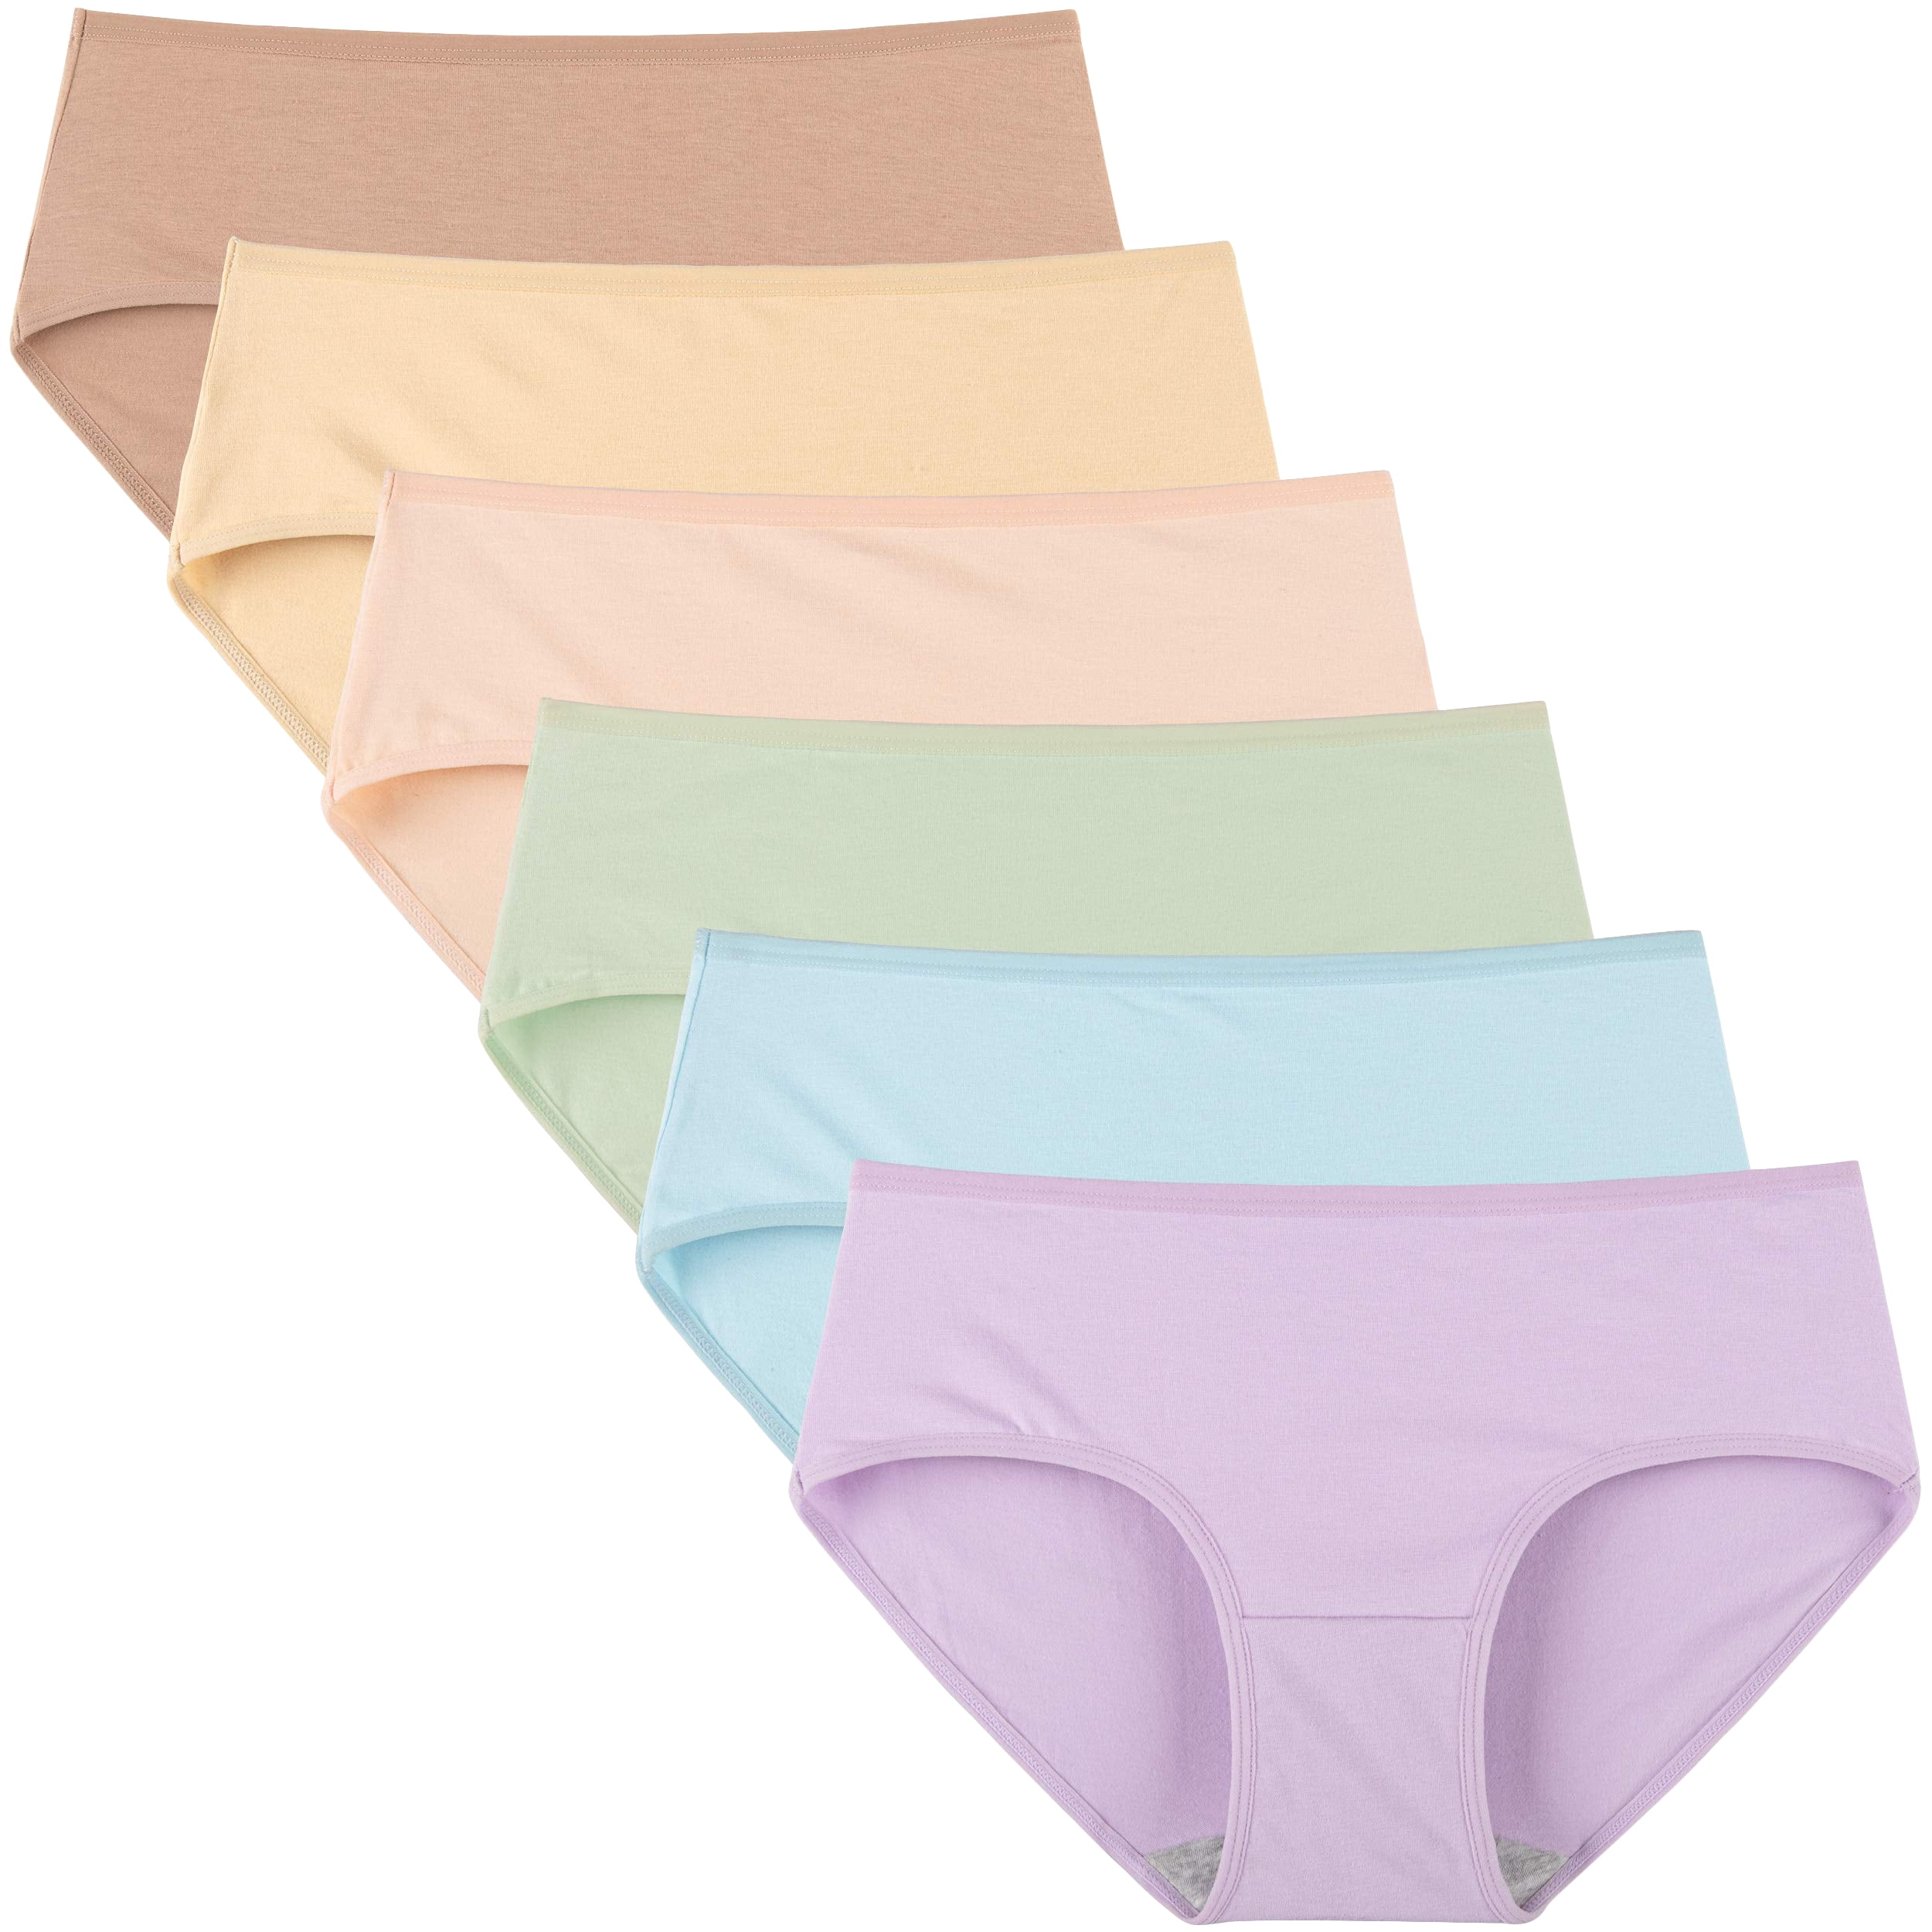  Womens Underwear Packs Seamless Delivery 6 Pack Woman  Hipster Panties 2XL Pack